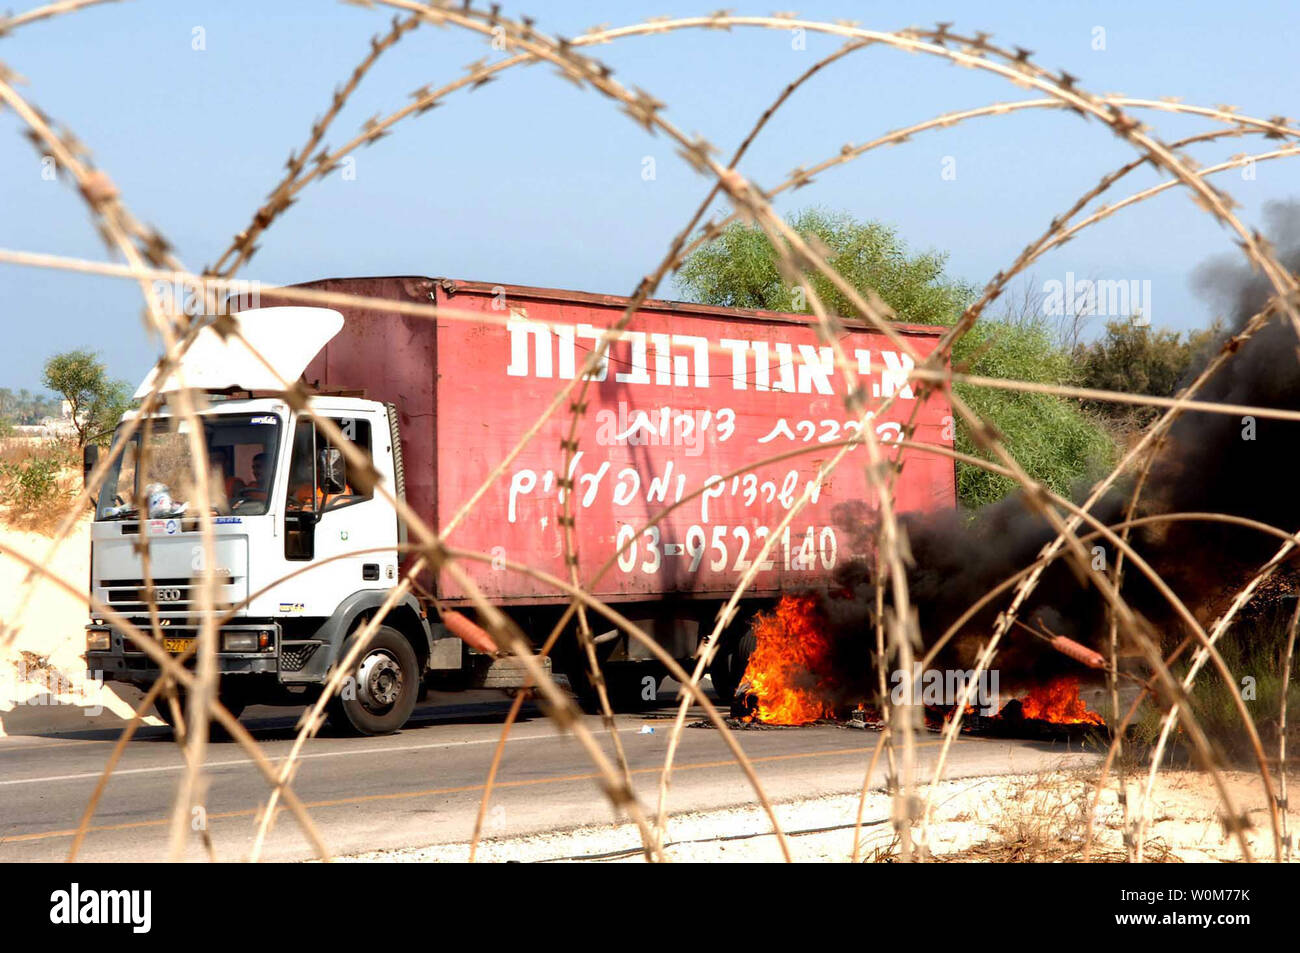 A moving van works around road blocks near the Nezer Hazani settlement as Israeli Defense Force personel arrive to serve eviction notices in Gush Katif, Gaza, on Aug. 15, 2005. Residents resisted as Israel began the Gaza pullout, posting 48 hour eviction notices to about 9,000 settlers in 21 Gaza camps.   (UPI Photo/IDF) Stock Photo